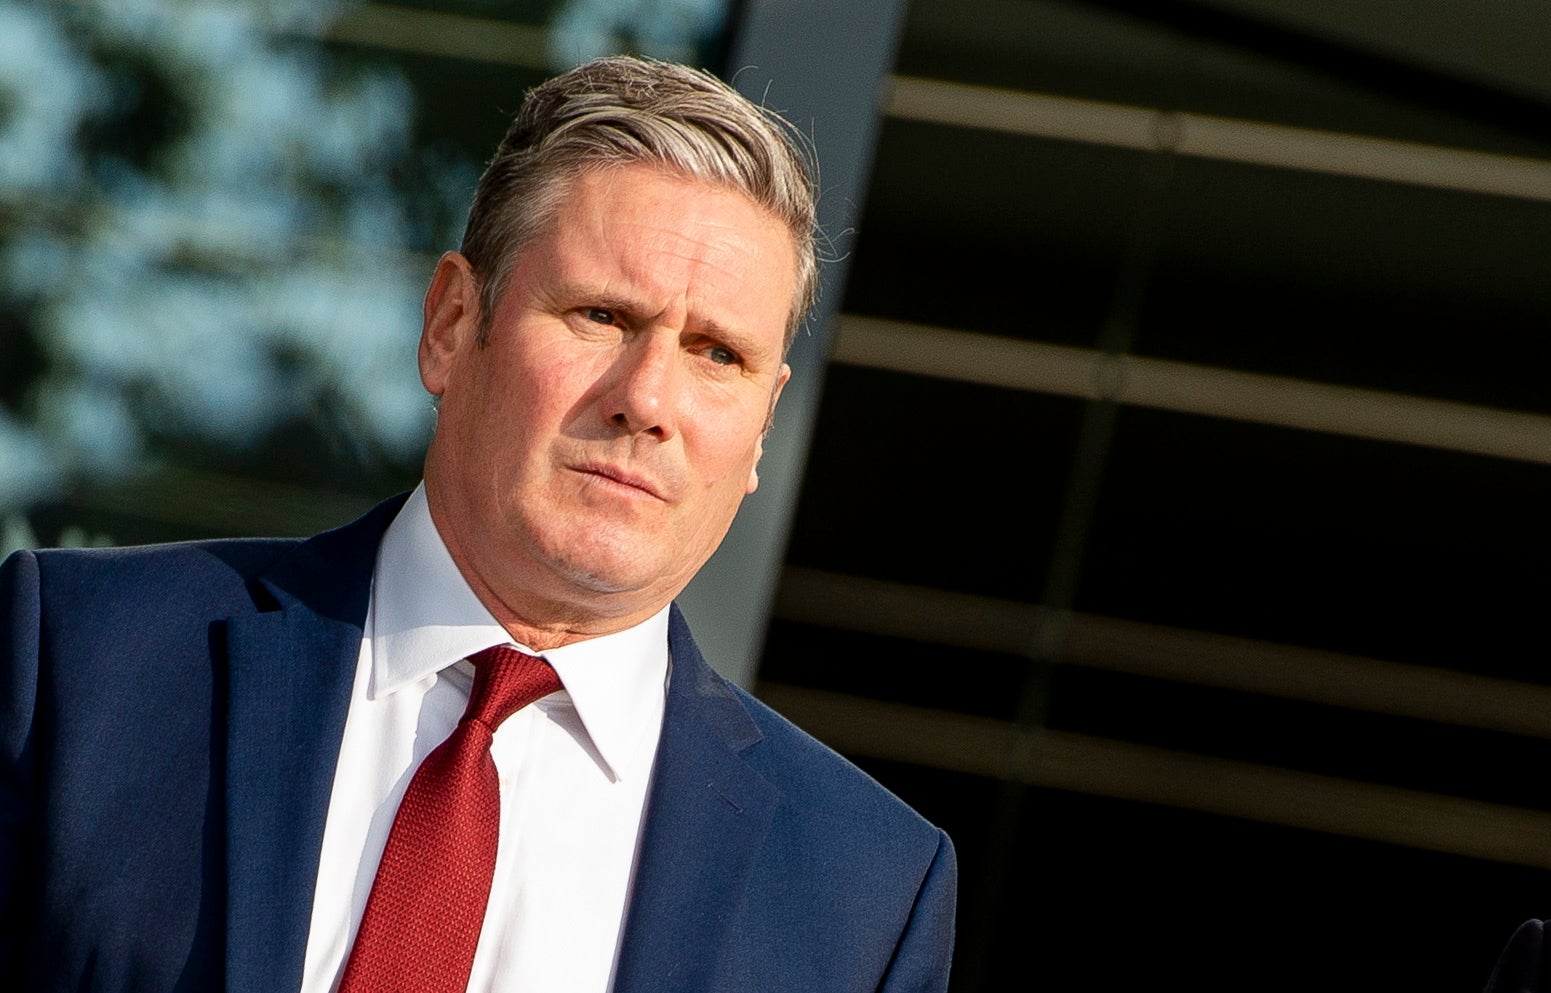 Keir Starmer managed to make his mark with his virtual speech